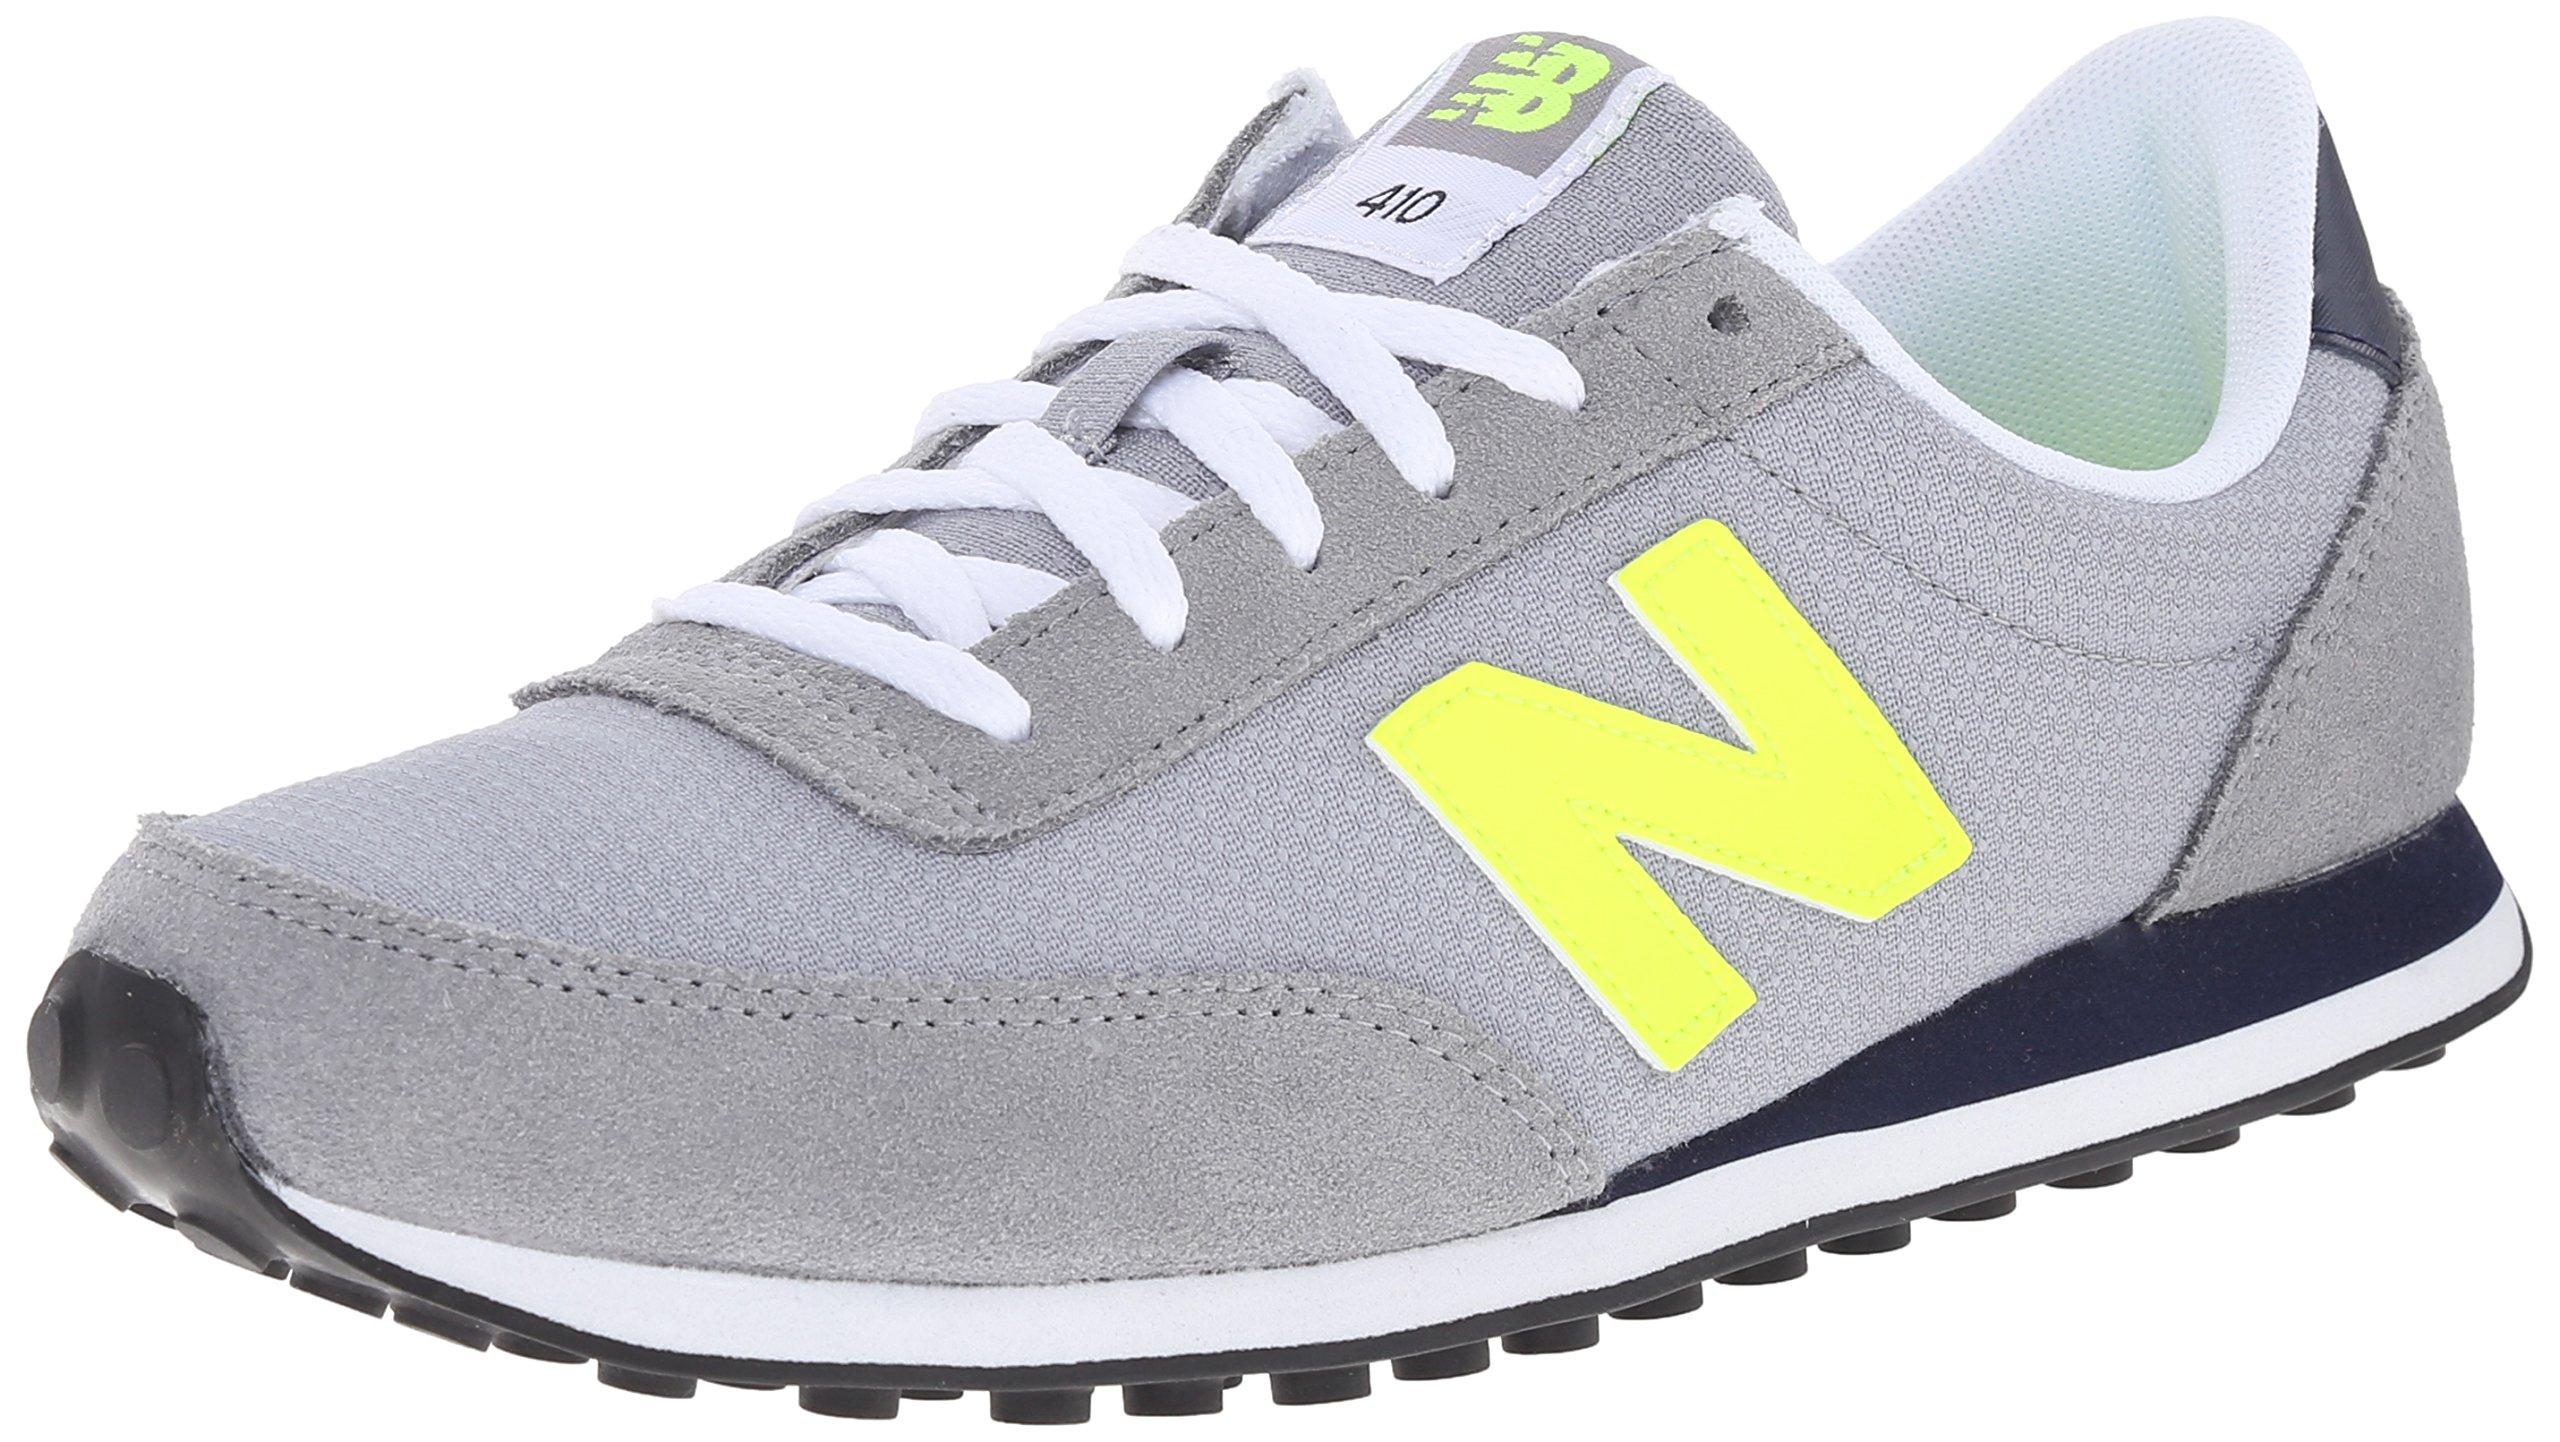 New Balance Suede 410 V1 Sneaker in Grey/Yellow (Black) | Lyst